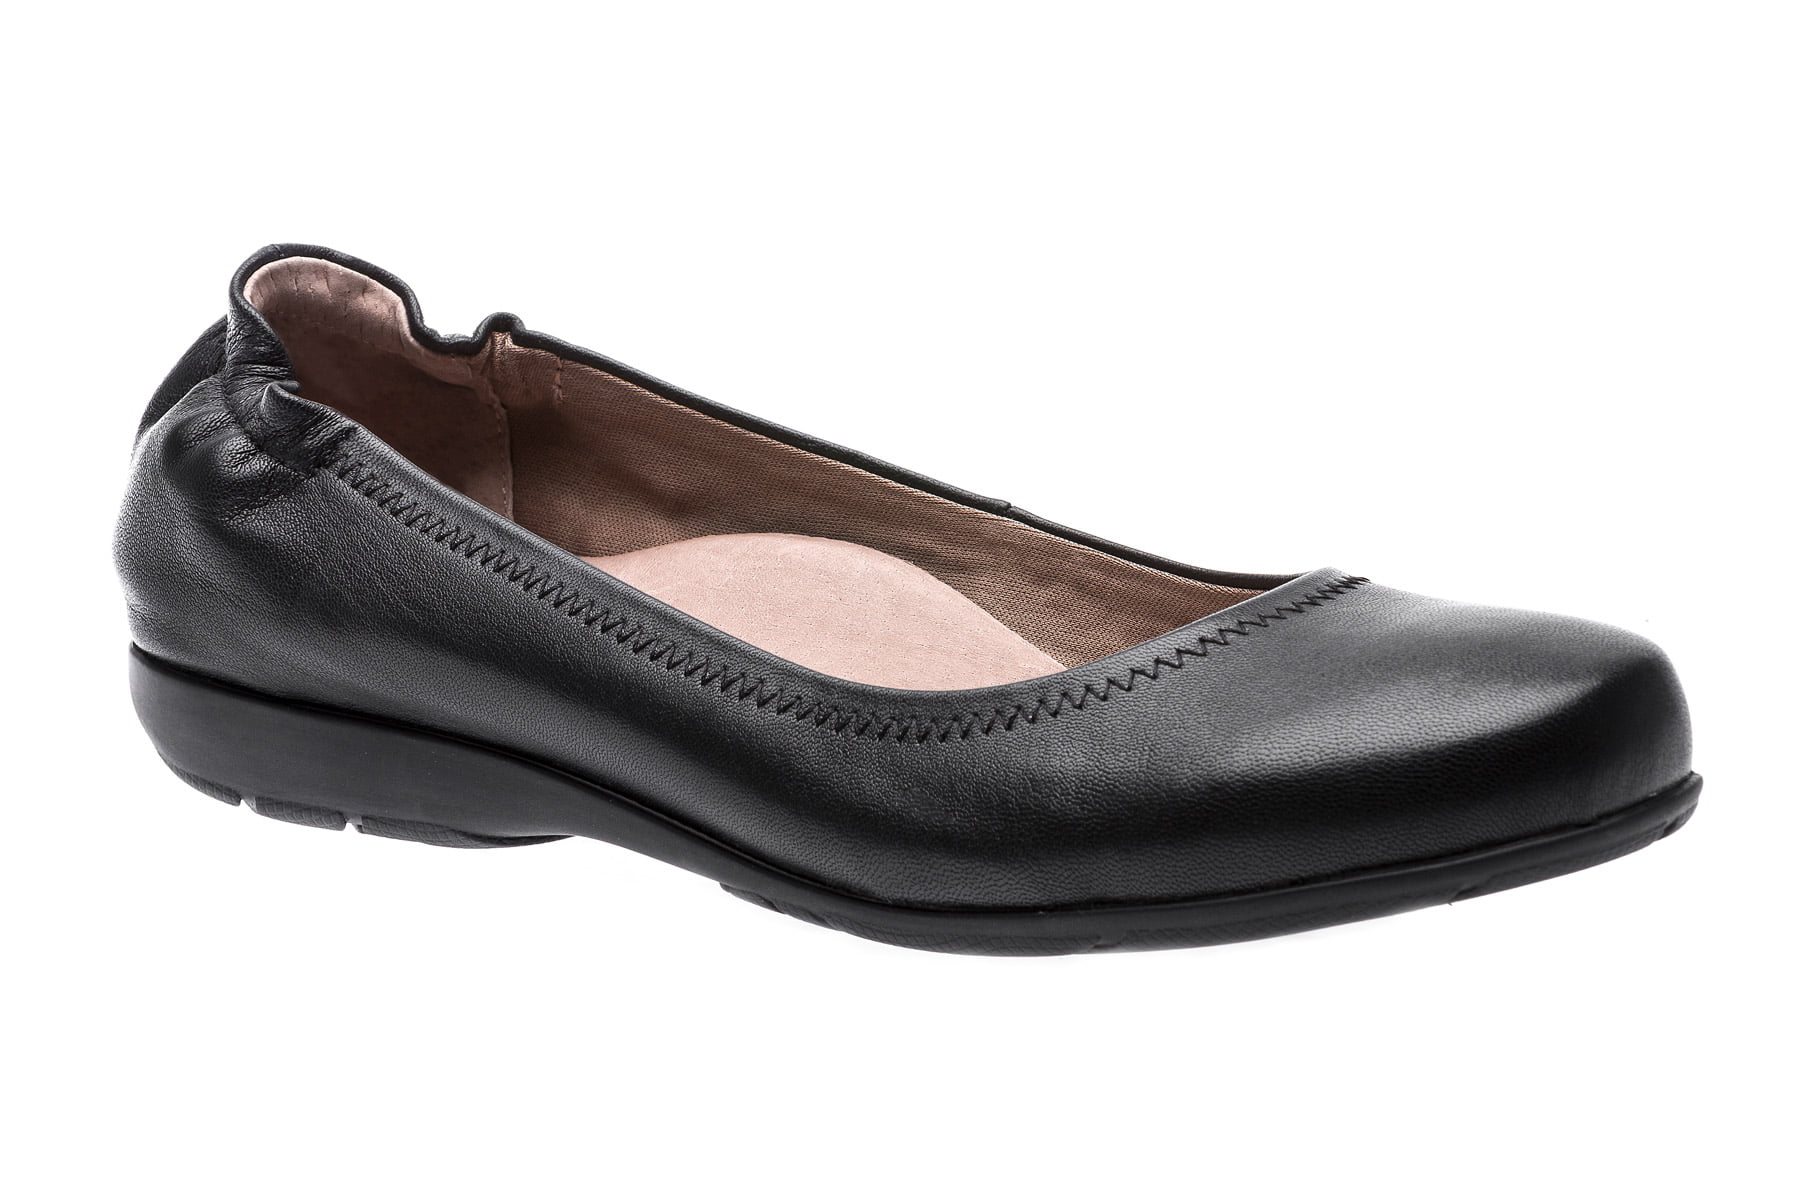 dress shoes for women at walmart